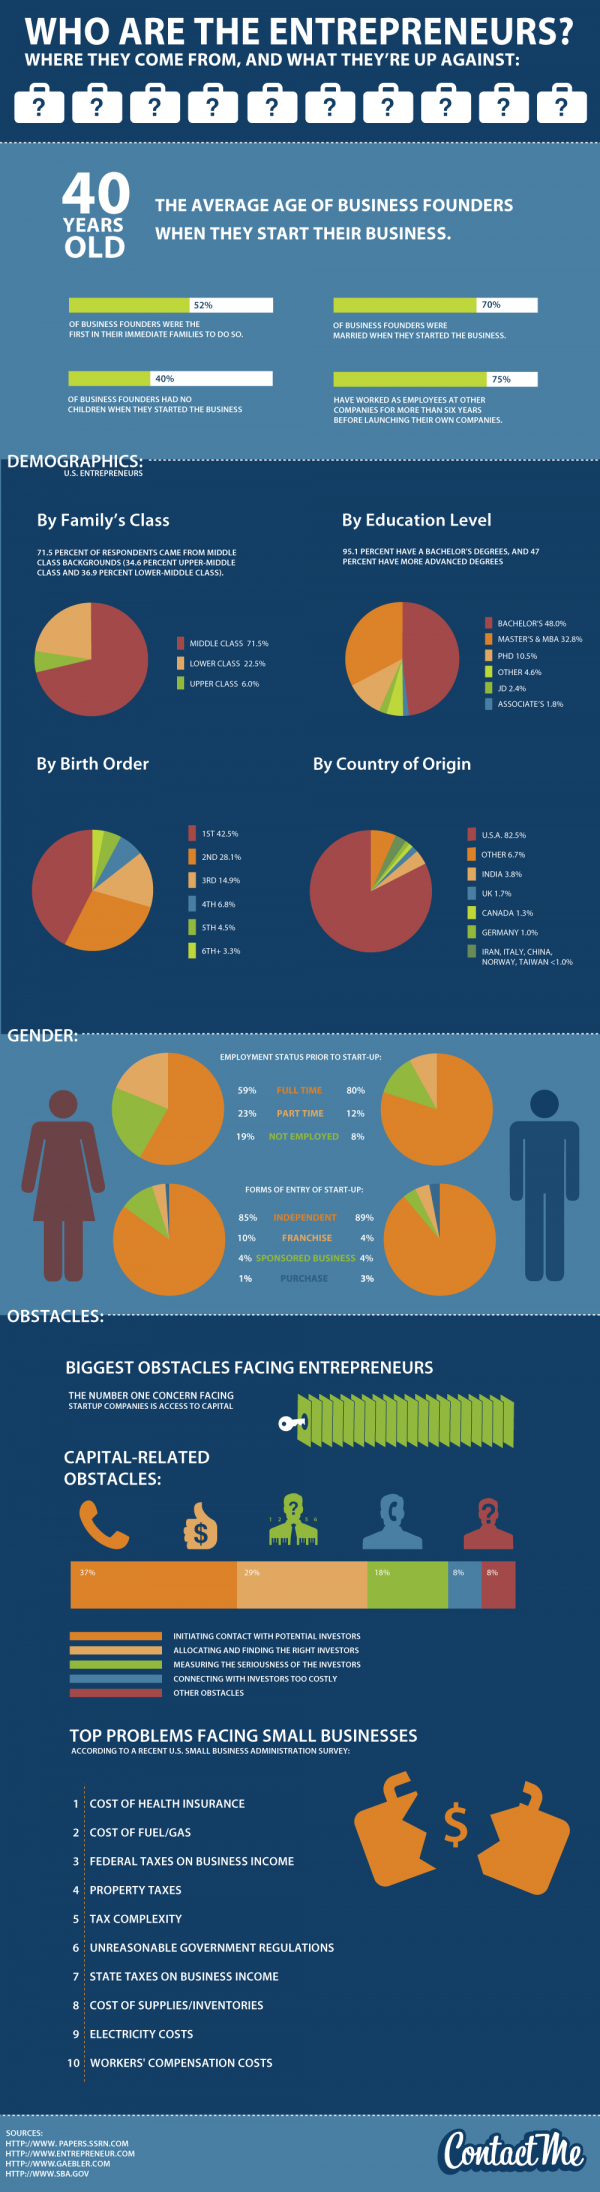 who-are-entreprenuers-